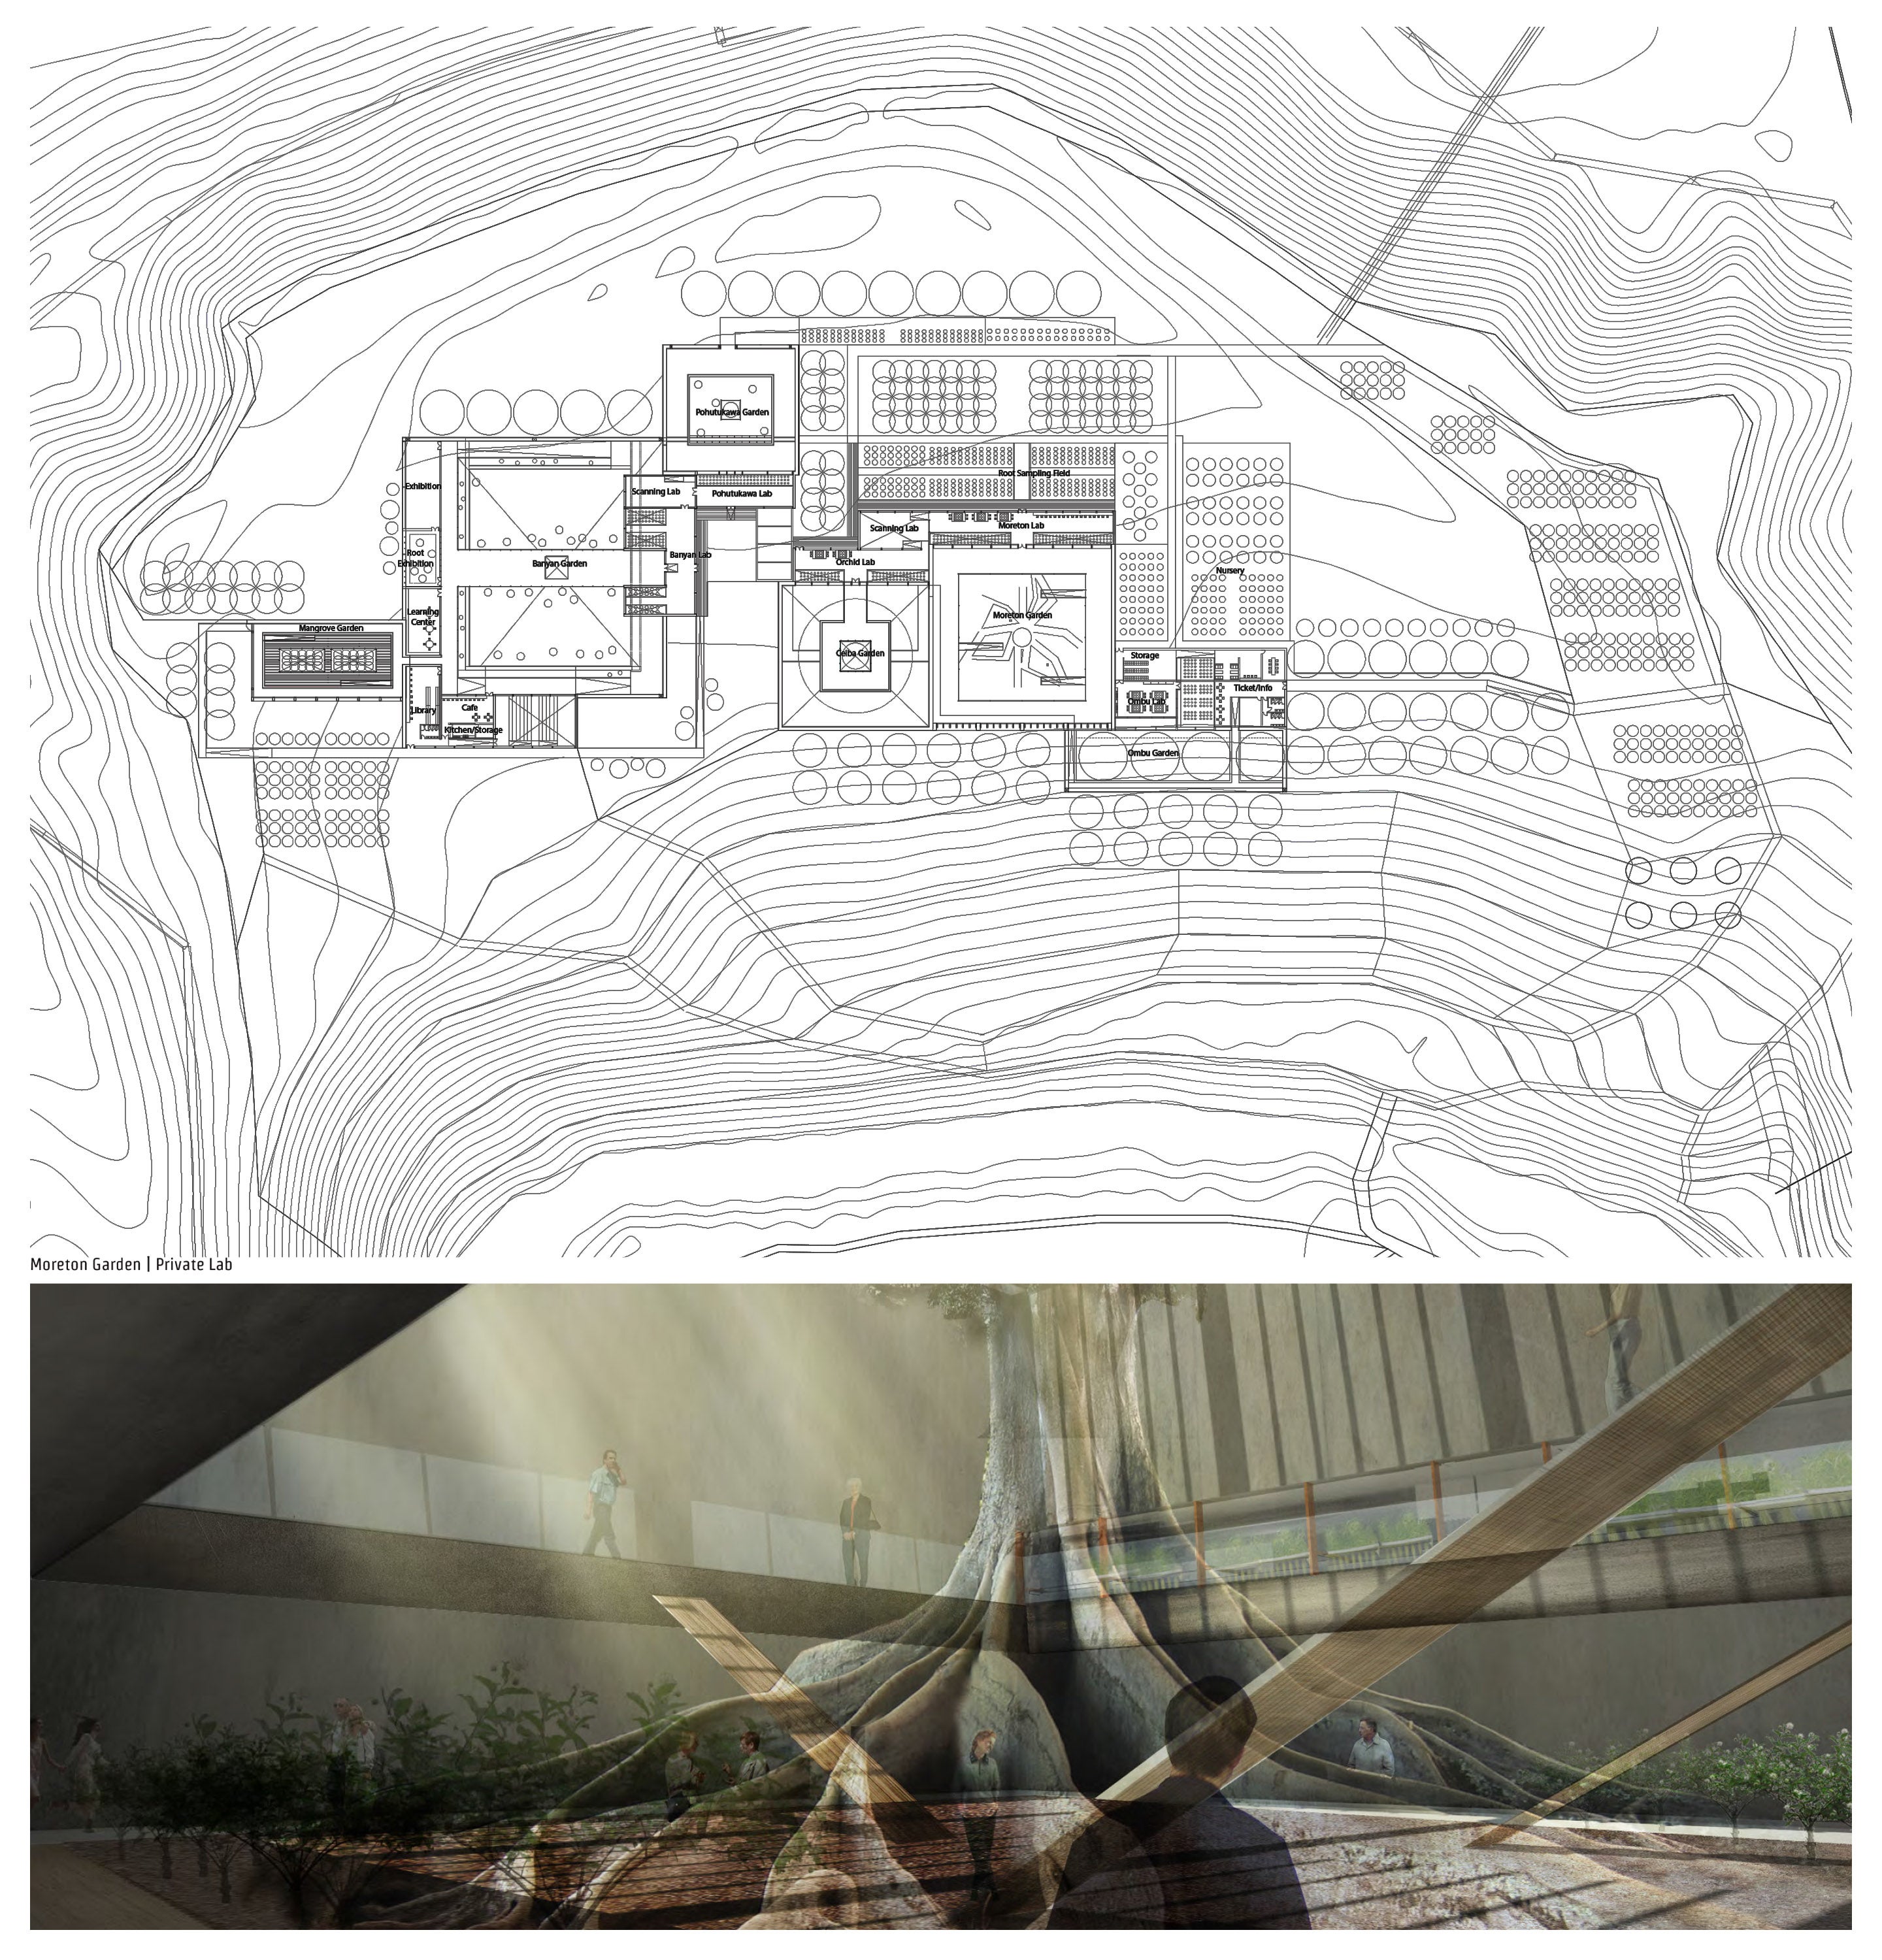 A presentation panel showing a detailed plan drawing and an interior render of the large atrium.